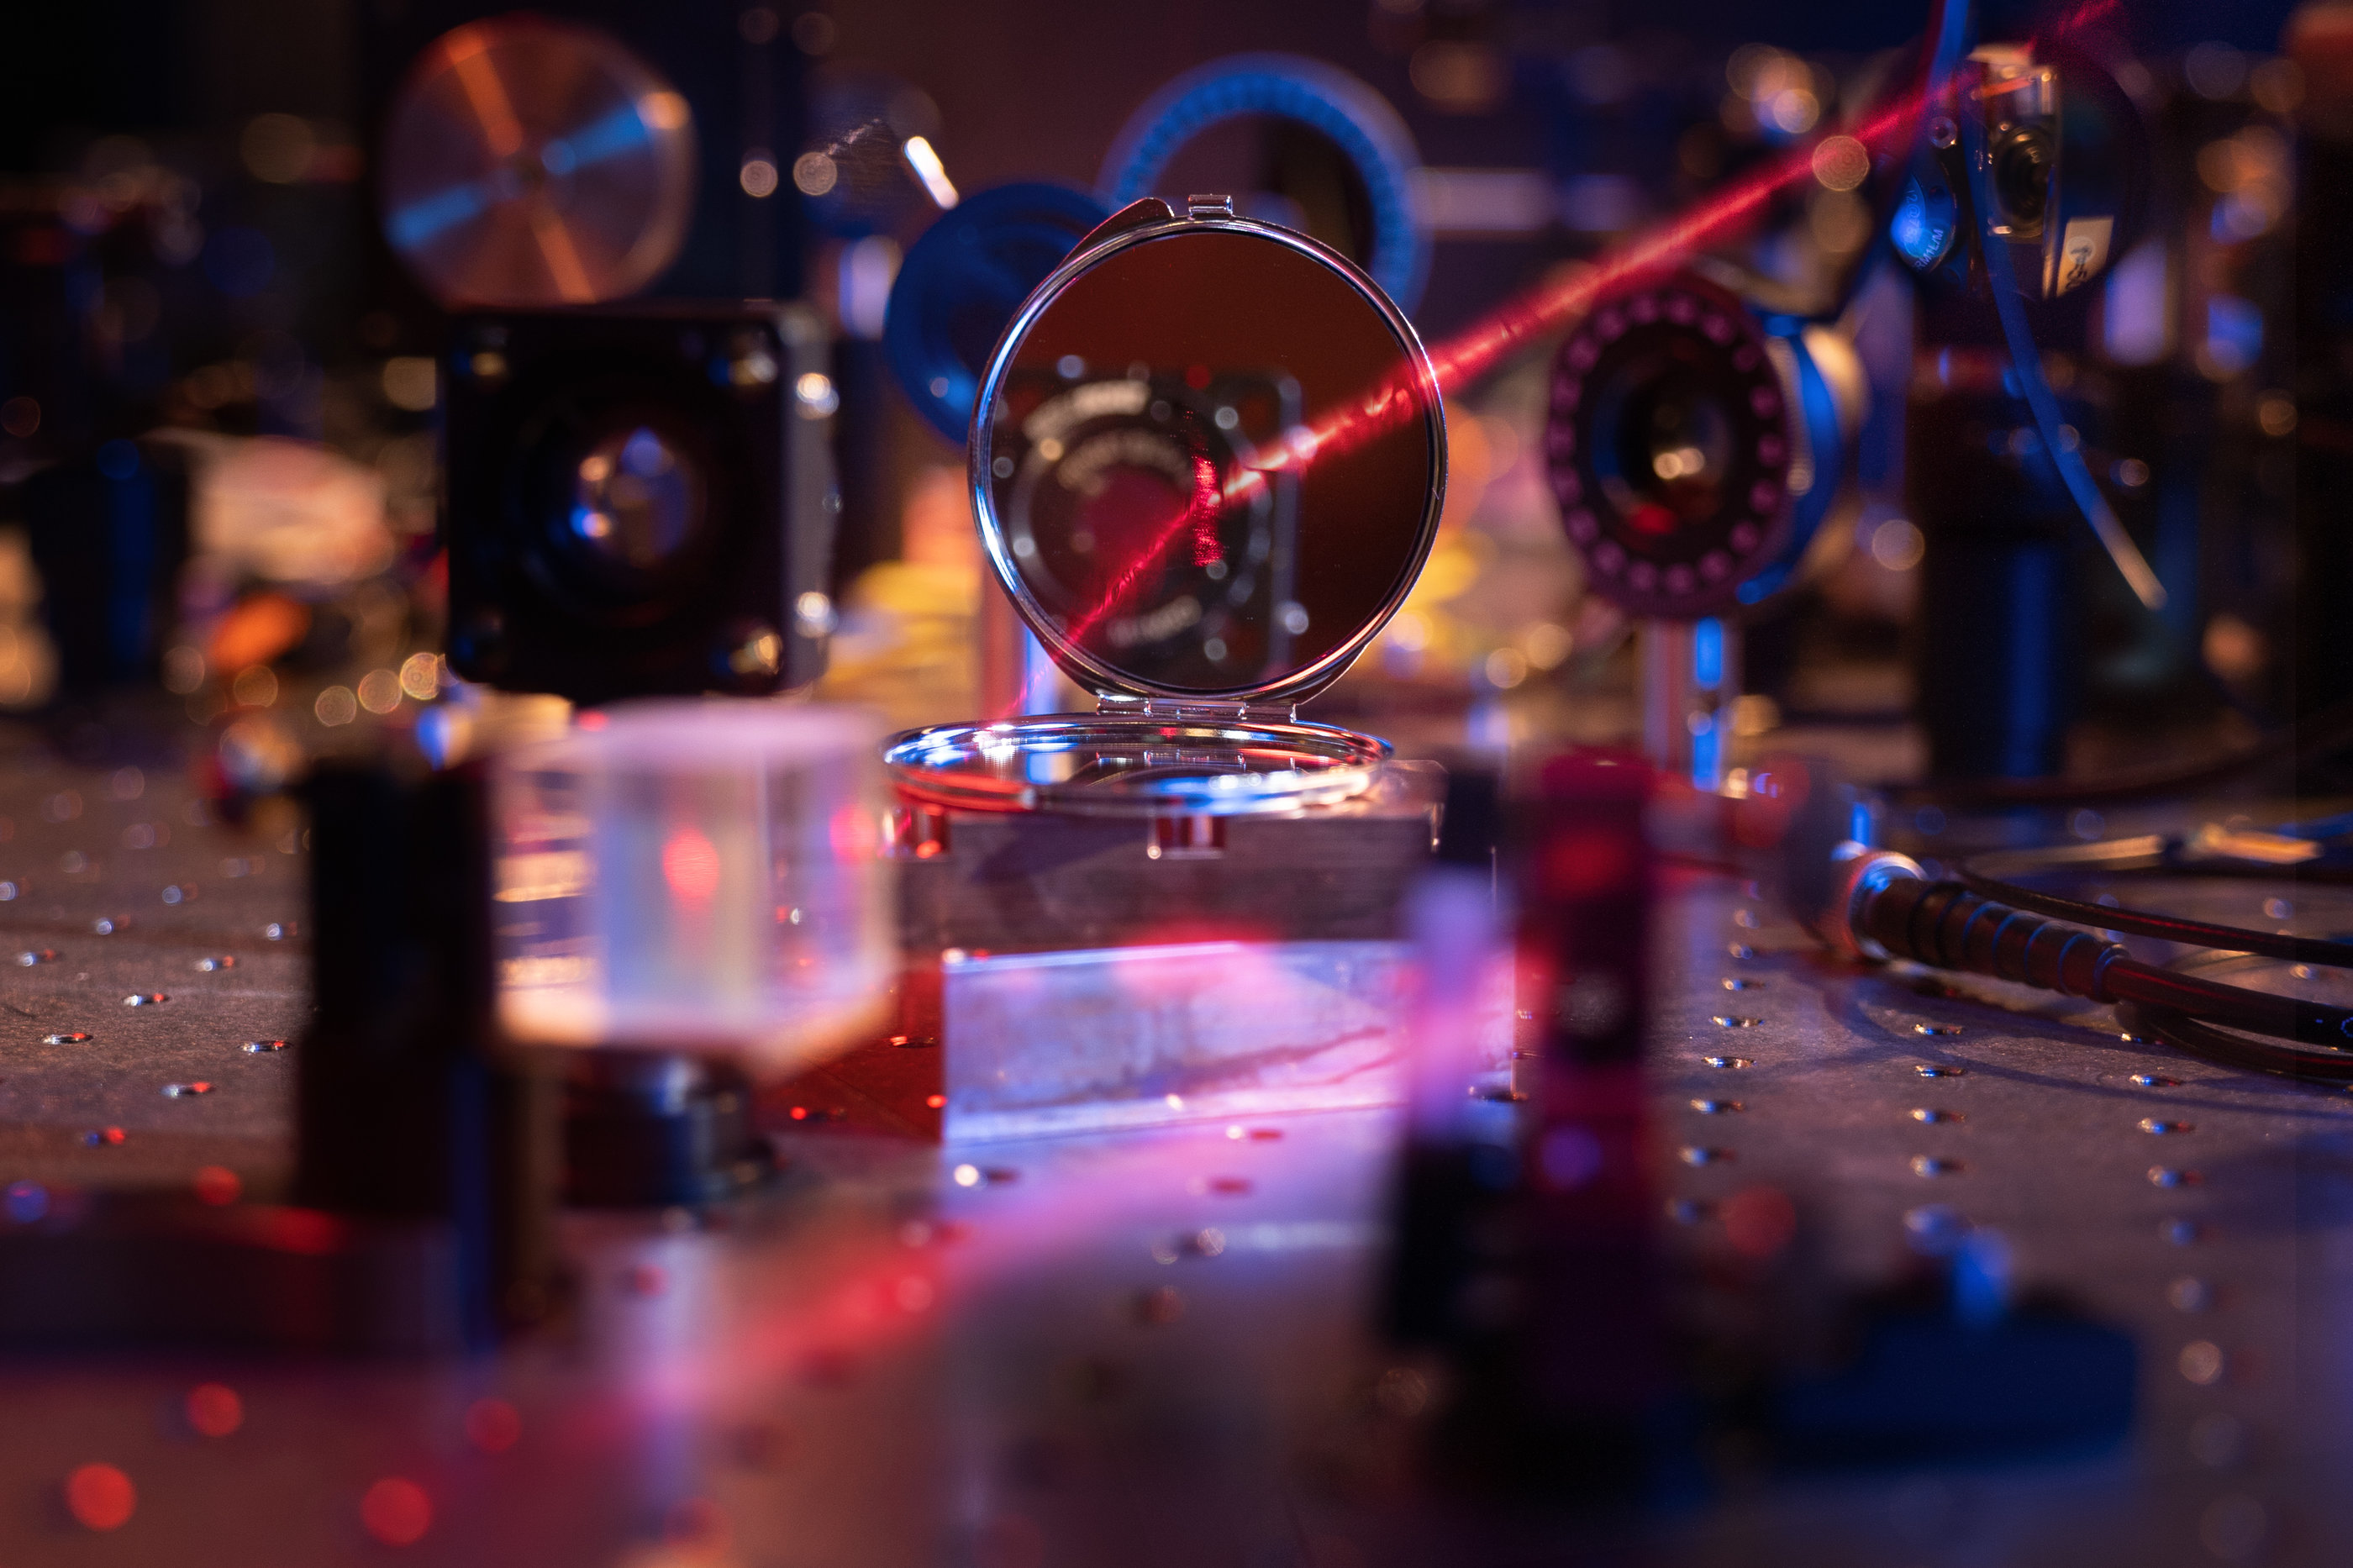 The nanoscale optical mirror could be an important tool for physicists studying quantum theories related to light-matter interaction.